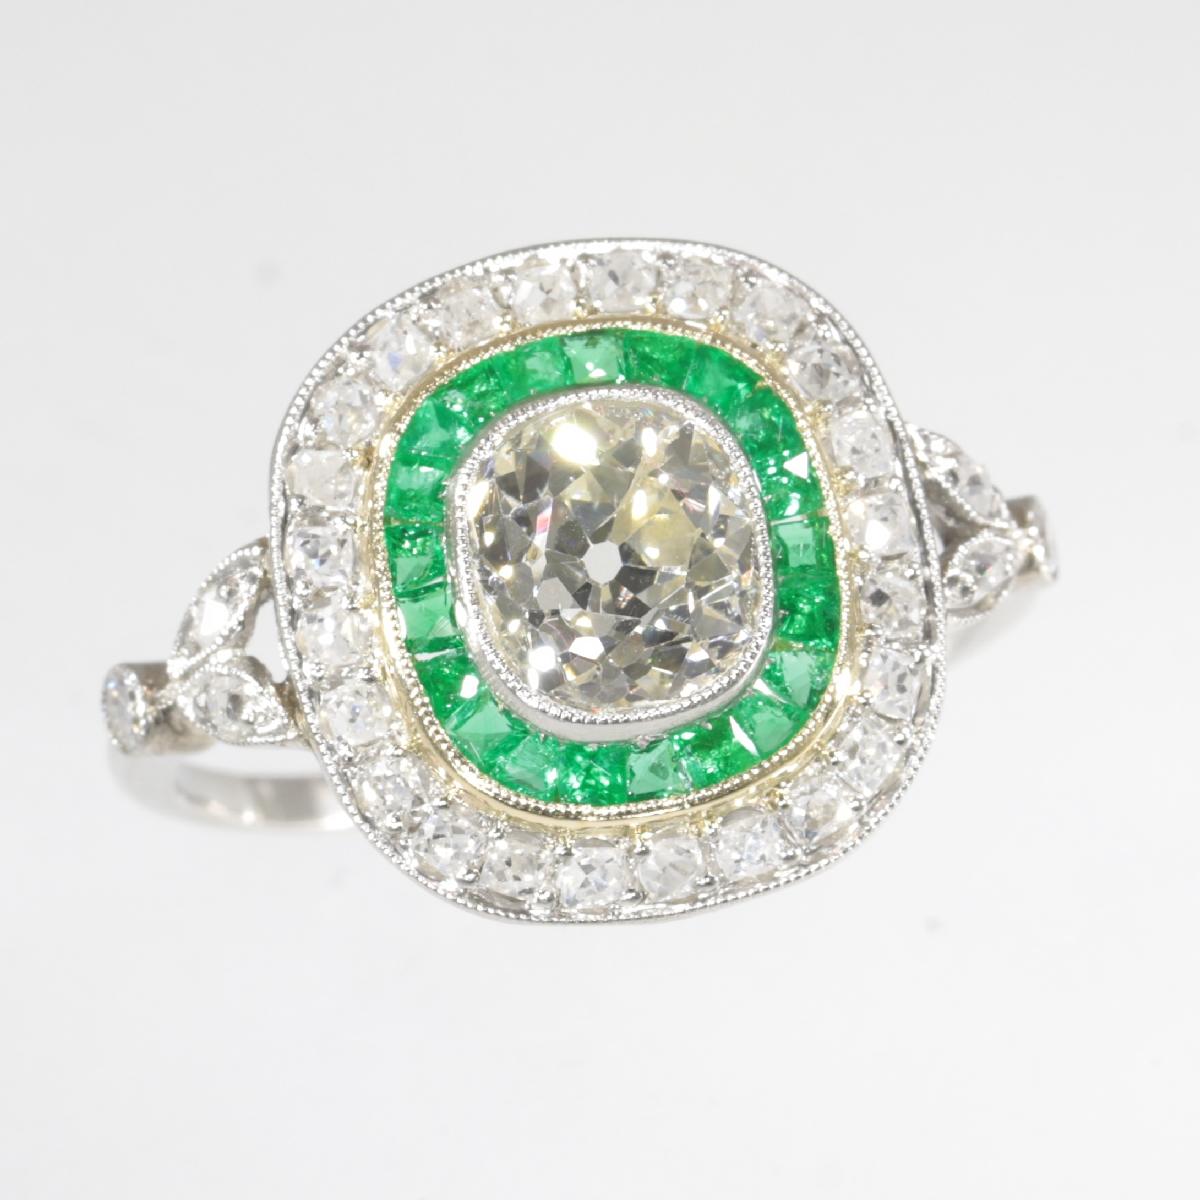 Stunning Vintage Art Deco Style Large Diamond and Emerald Engagement Ring, 1930s For Sale 4